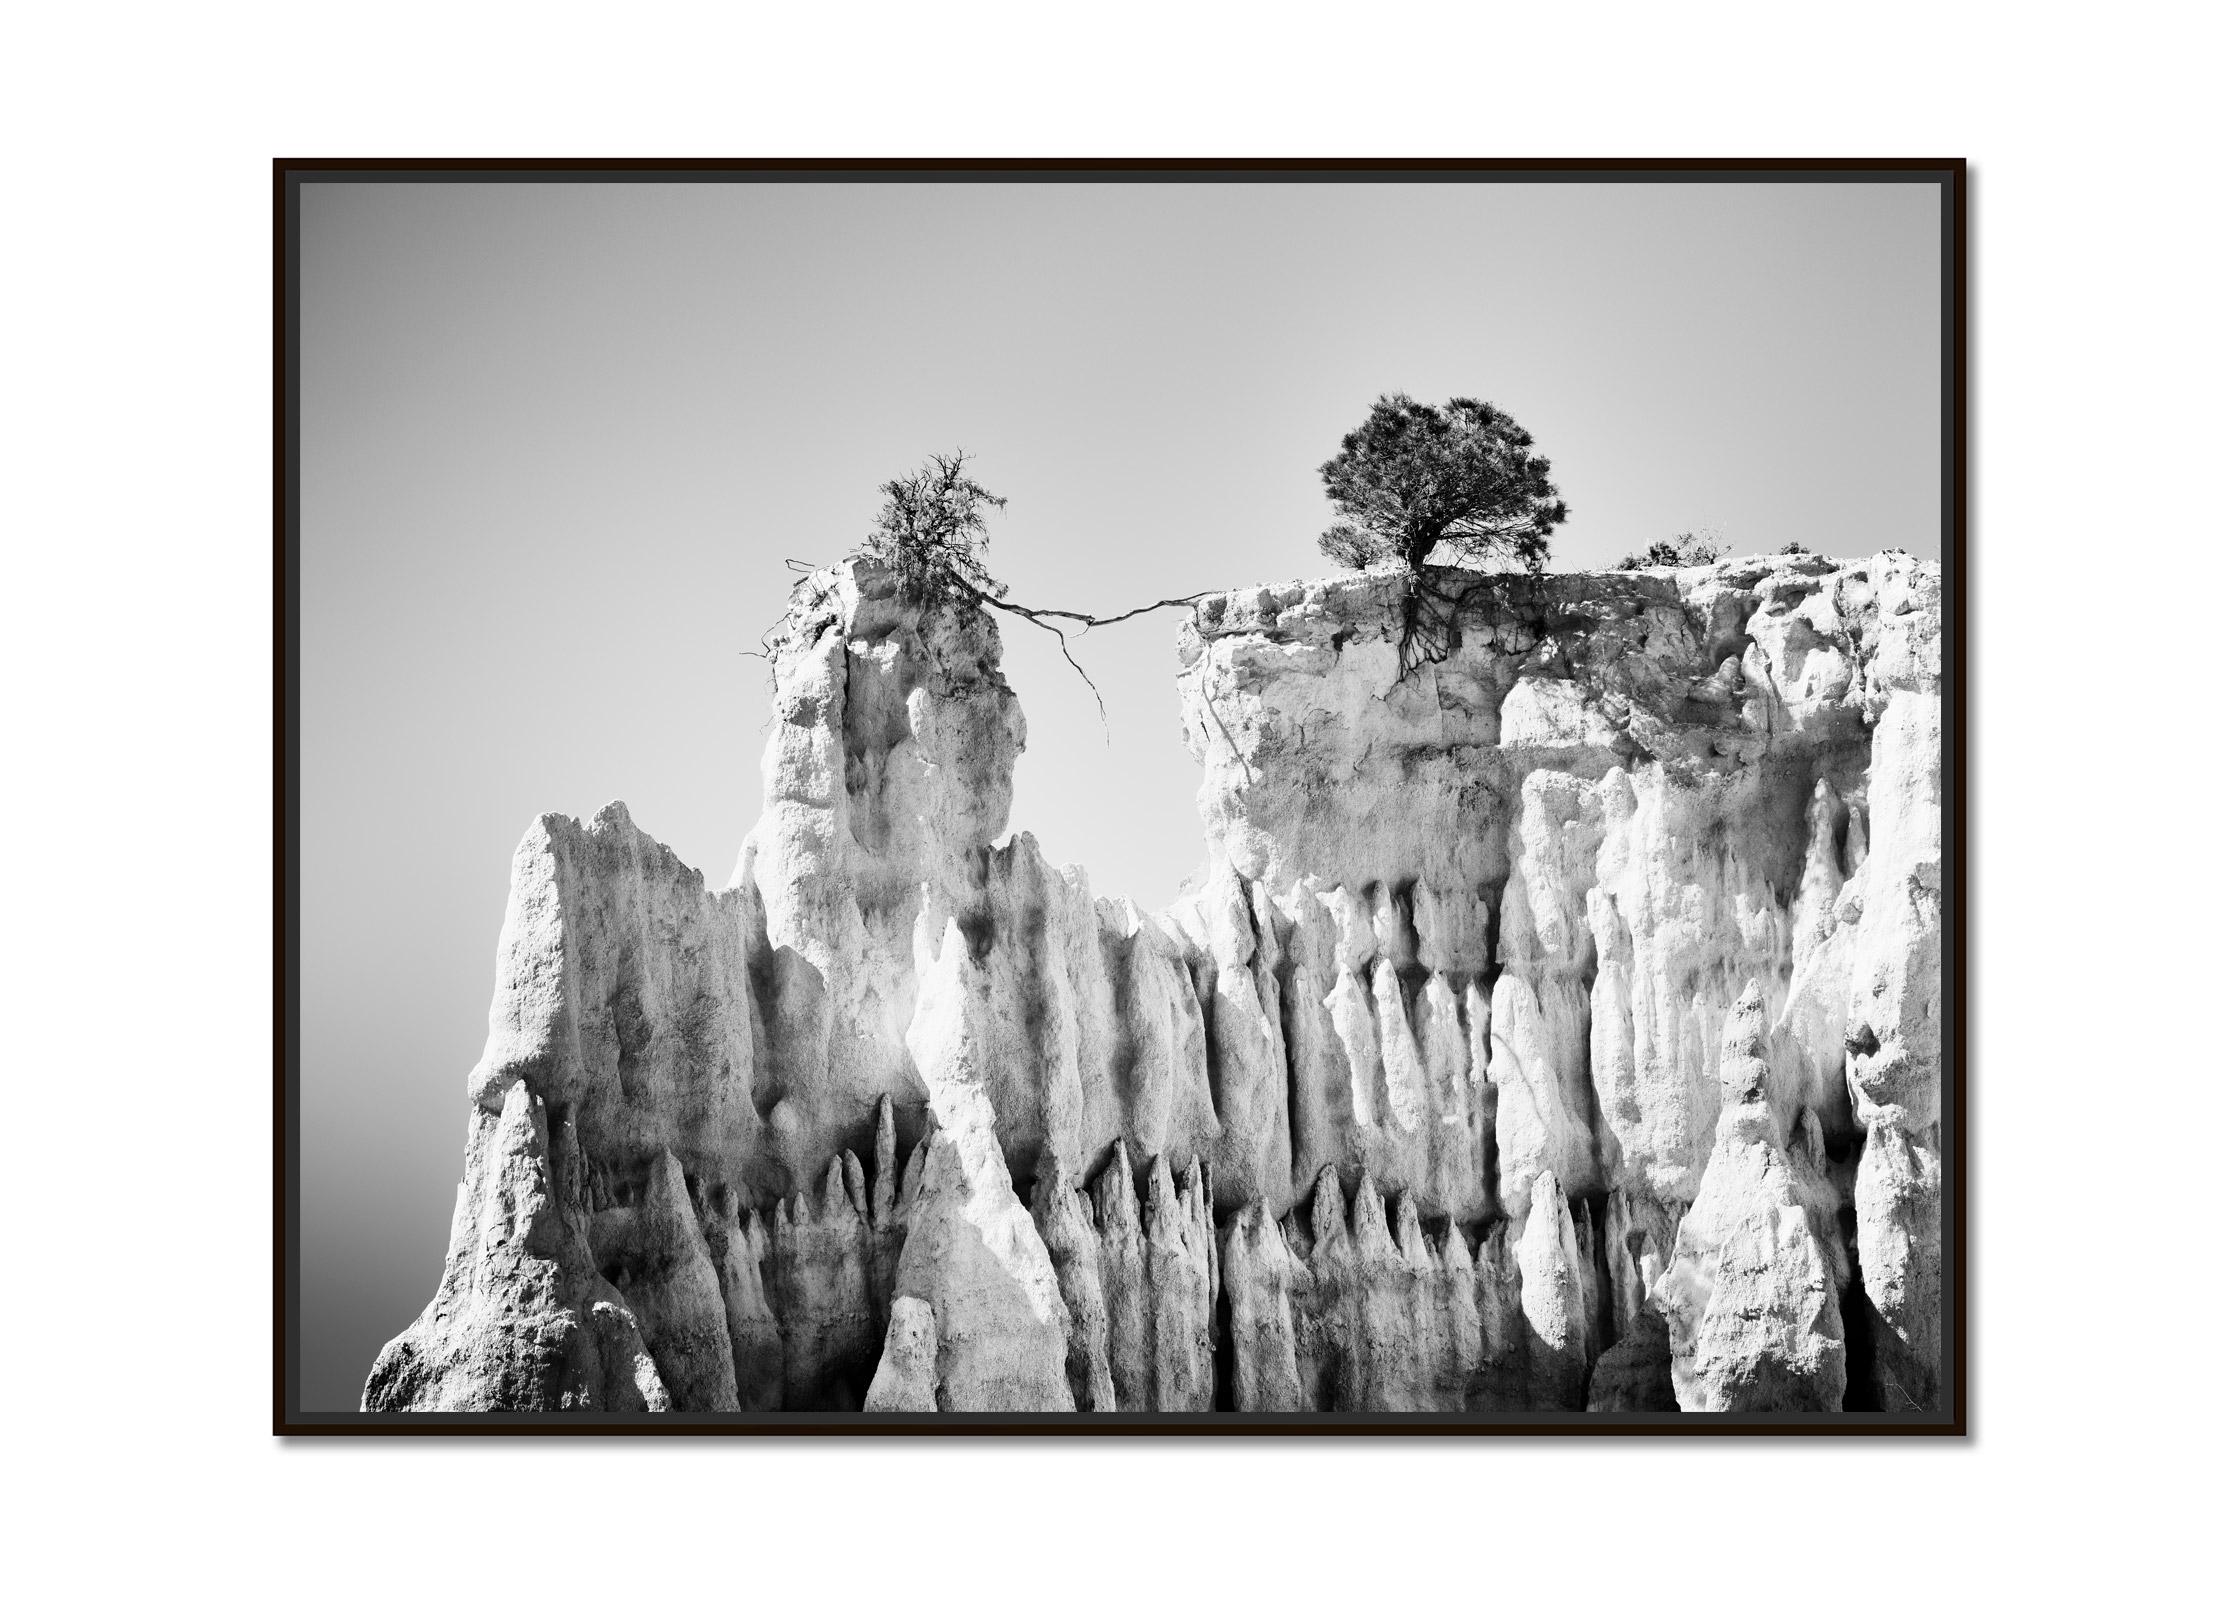 The Organs of Ille-sur-Tet, sandstone, black and white photography, landscape - Photograph by Gerald Berghammer